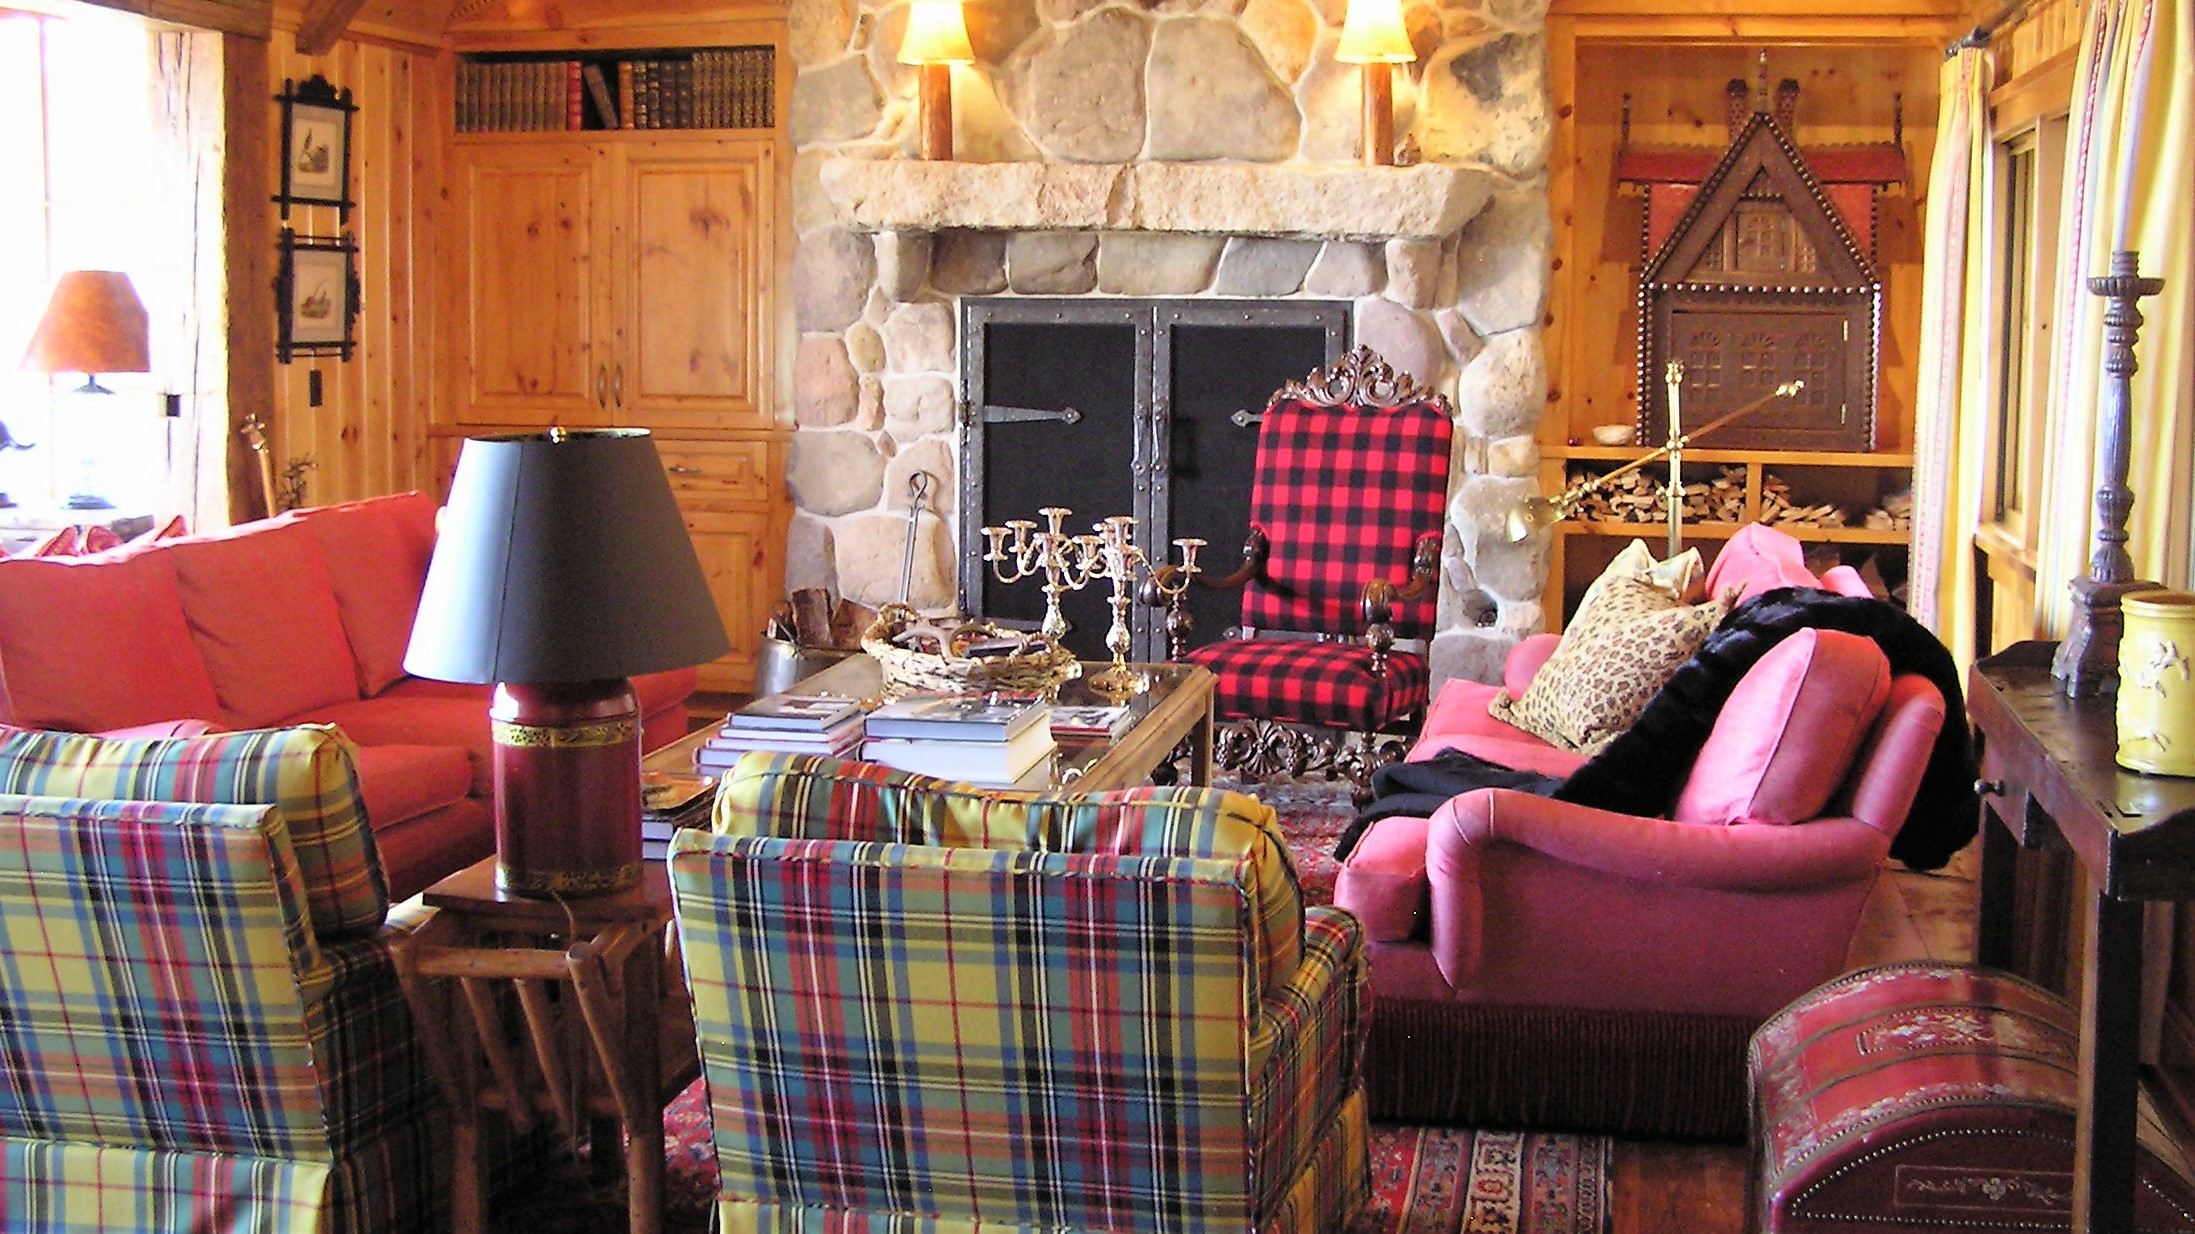 Beautiful rustic cabin furnishings selected by our in-house interior designer.